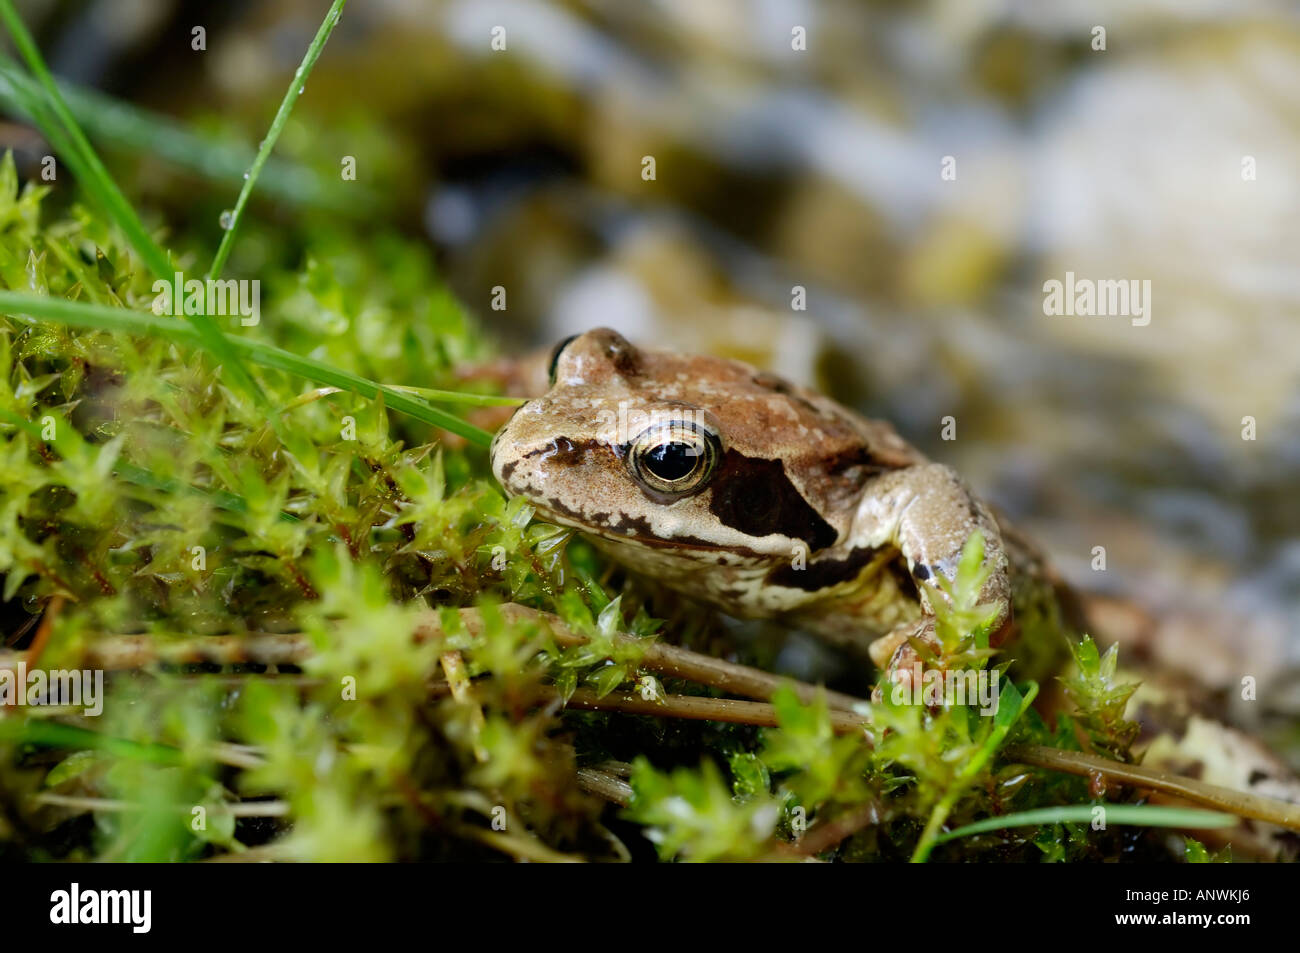 Grass or common frog sitting in moss Stock Photo